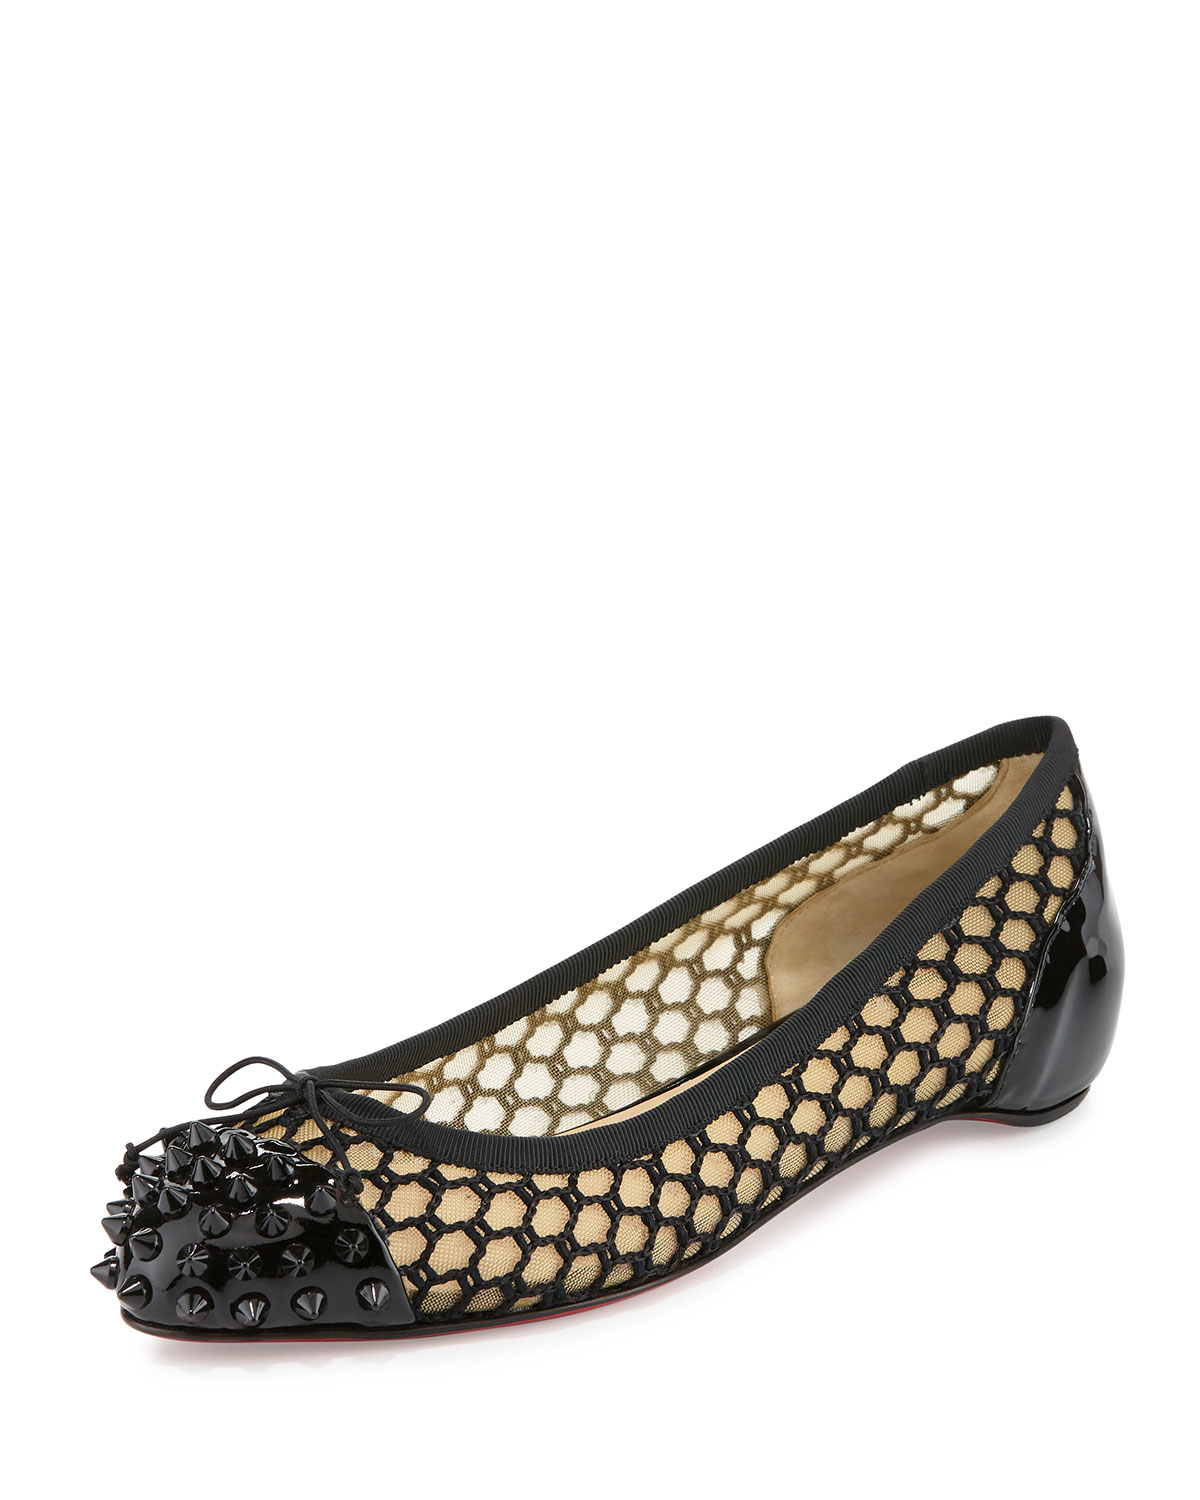 spiked loafers cheap - Christian Louboutin Flats | Lyst?